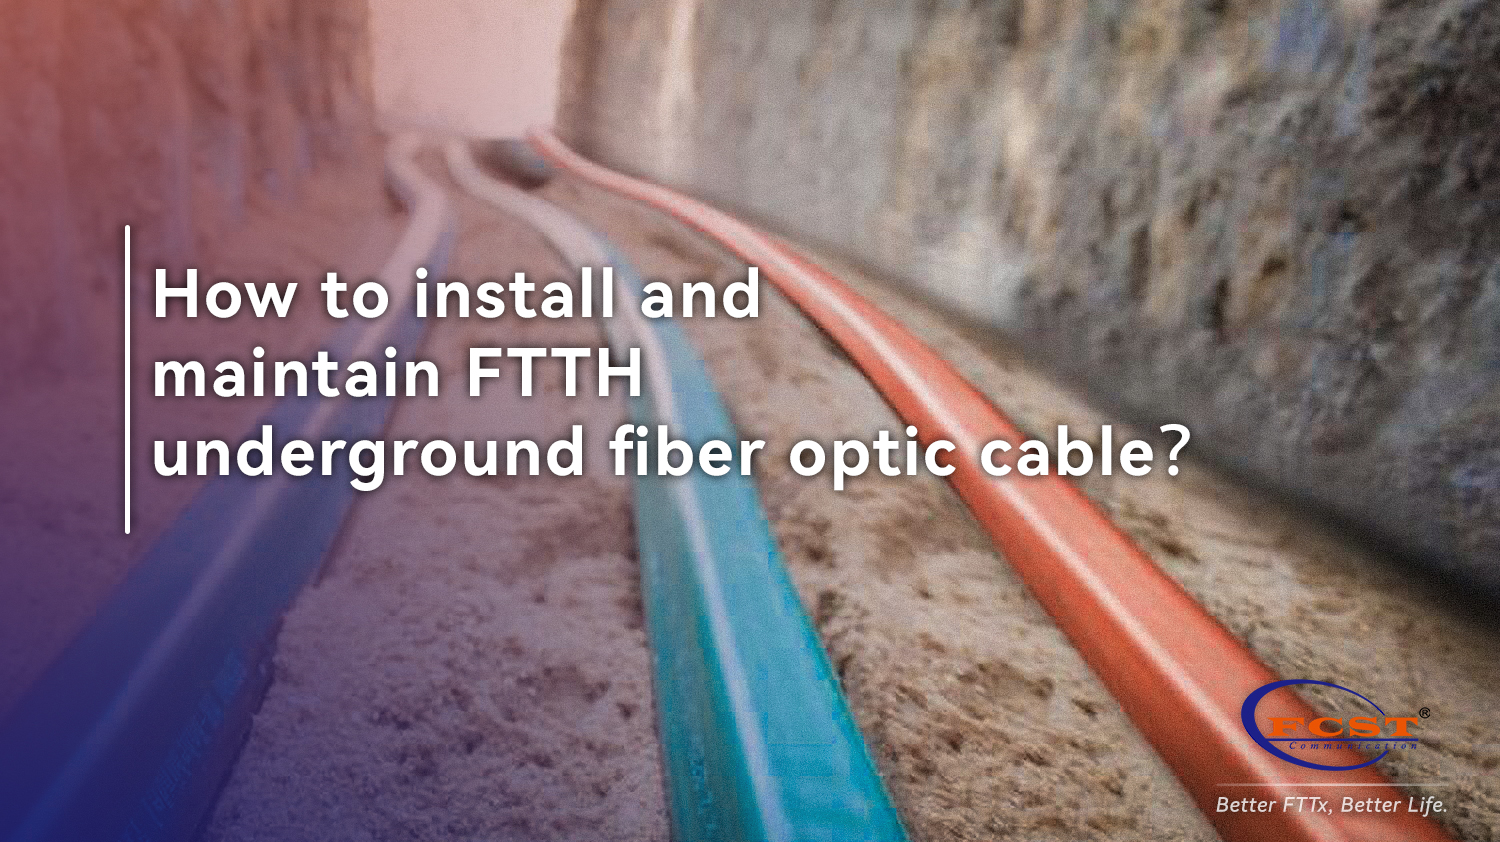 How to install and maintain FTTH underground fiber optic cable？